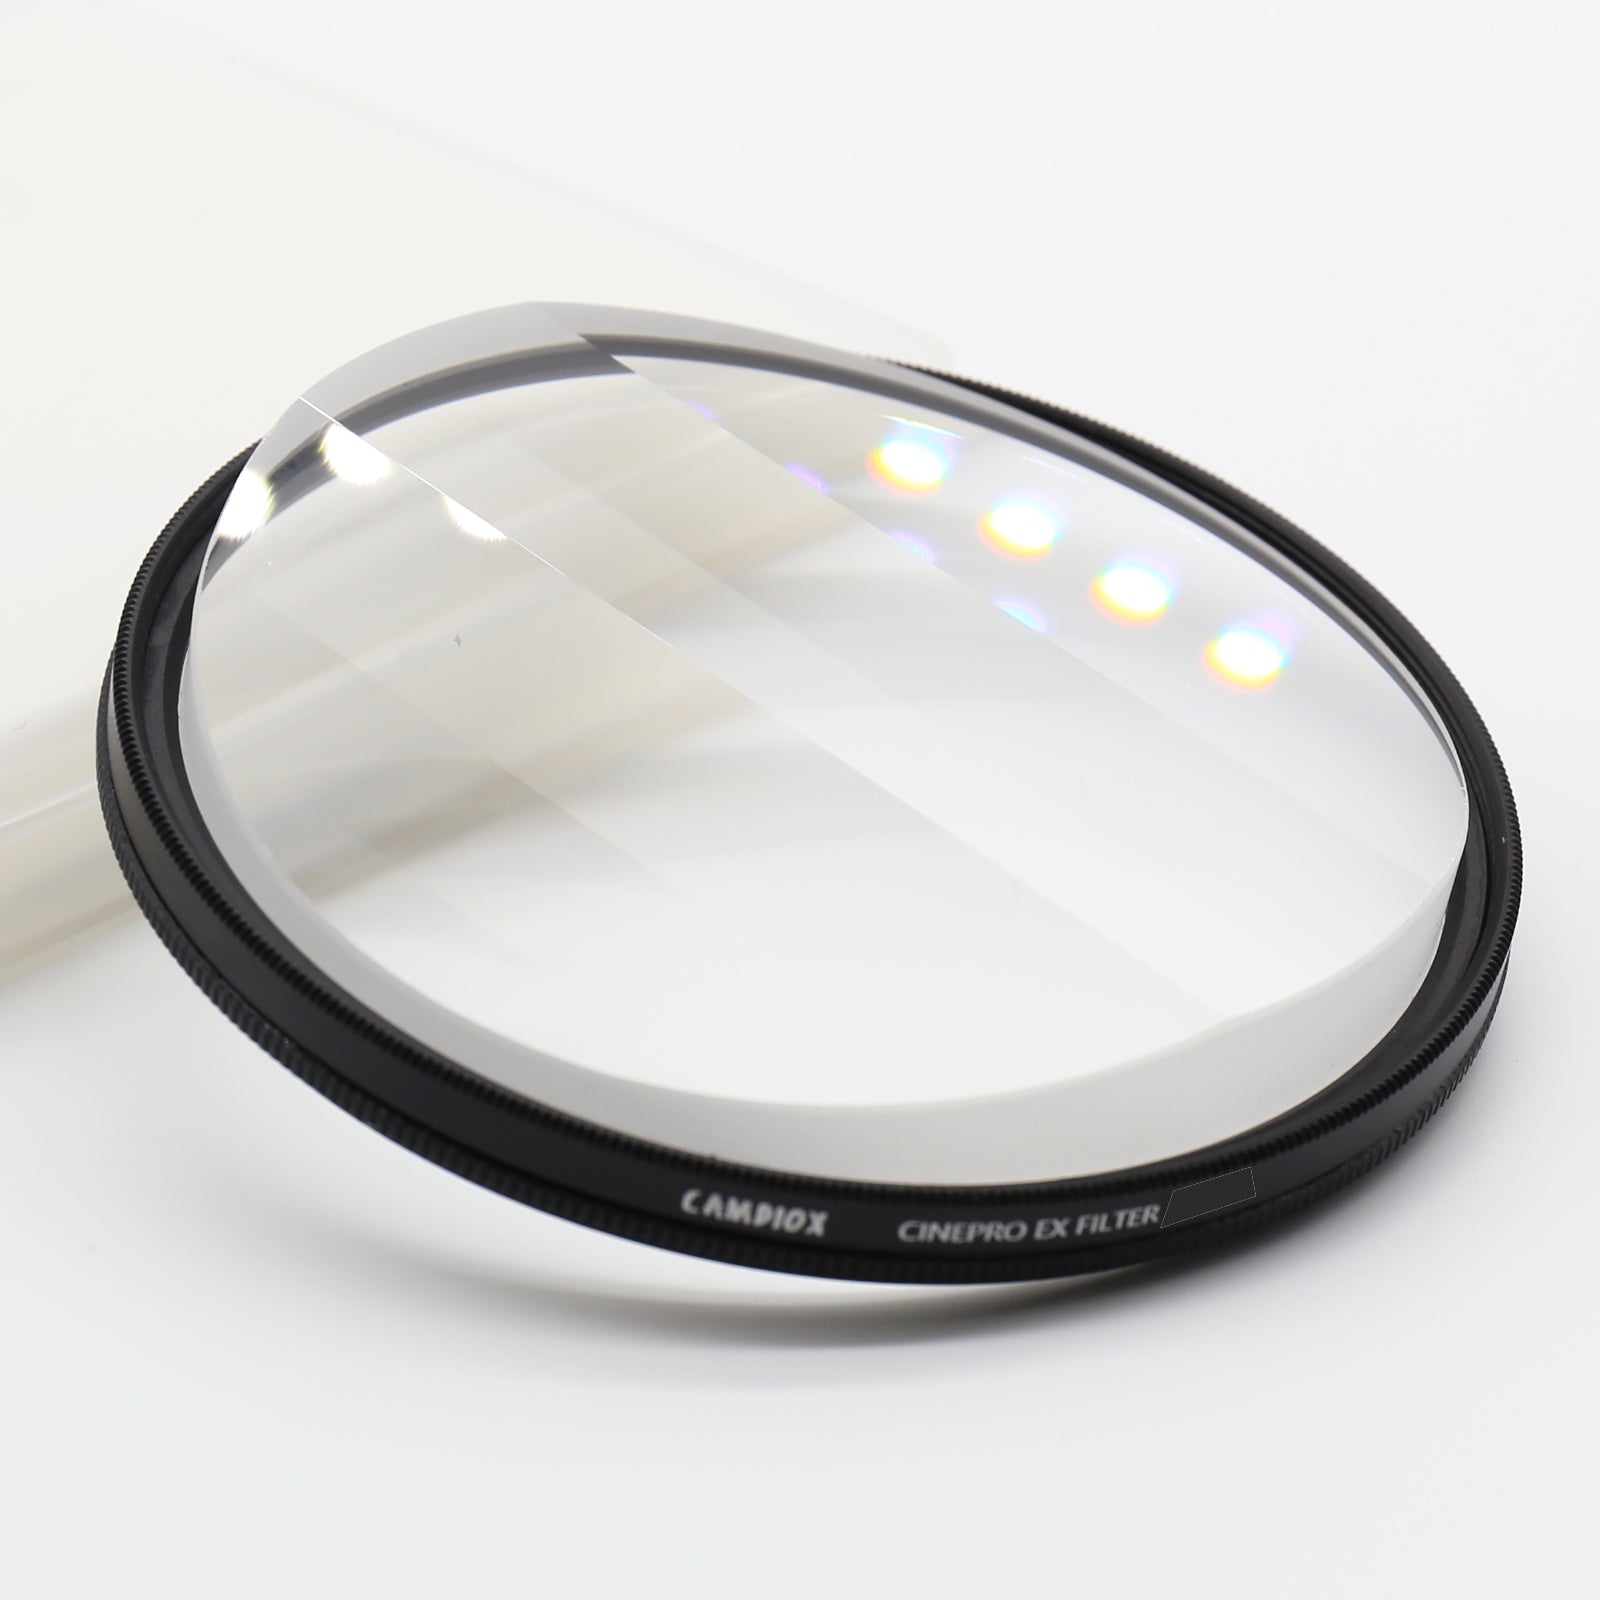 Camdiox Cinepro Pro Filter - Trio line 3 parallel lines - effect filter for Canon Nikon Sony Olympus Leica DSLR mirrorless camera lenses